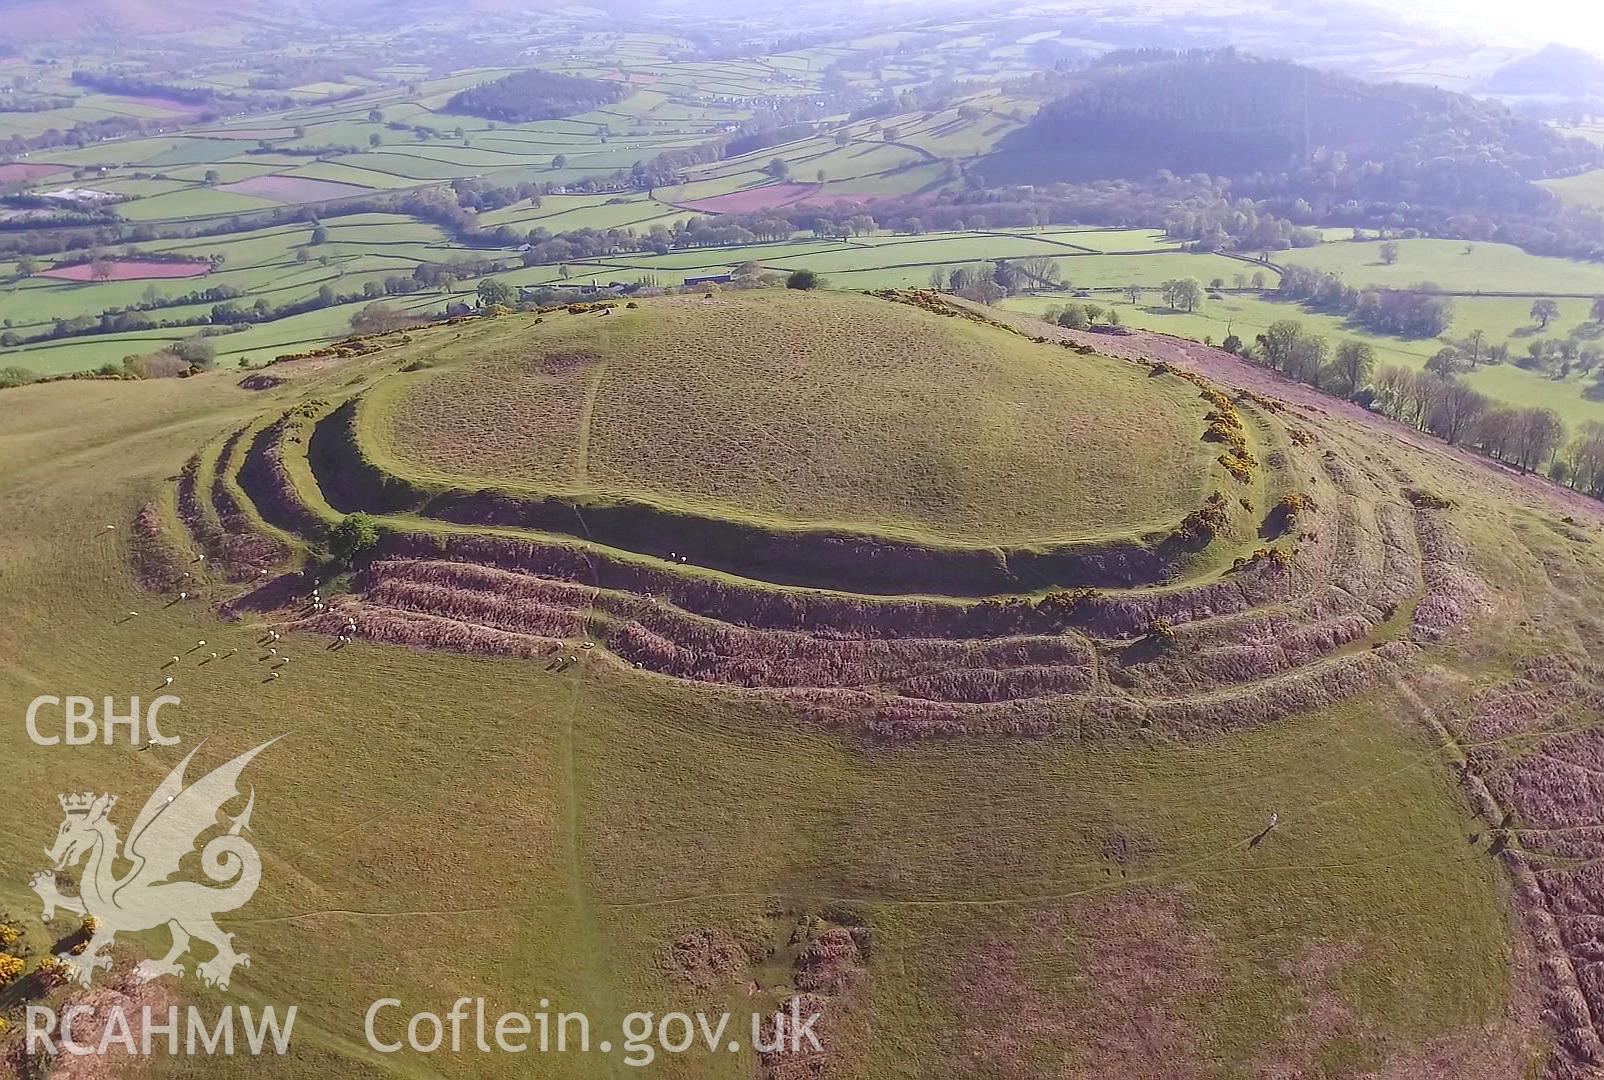 Colour photo showing Pen y Crug Hillfort, produced by Paul R. Davis,  May 2017.